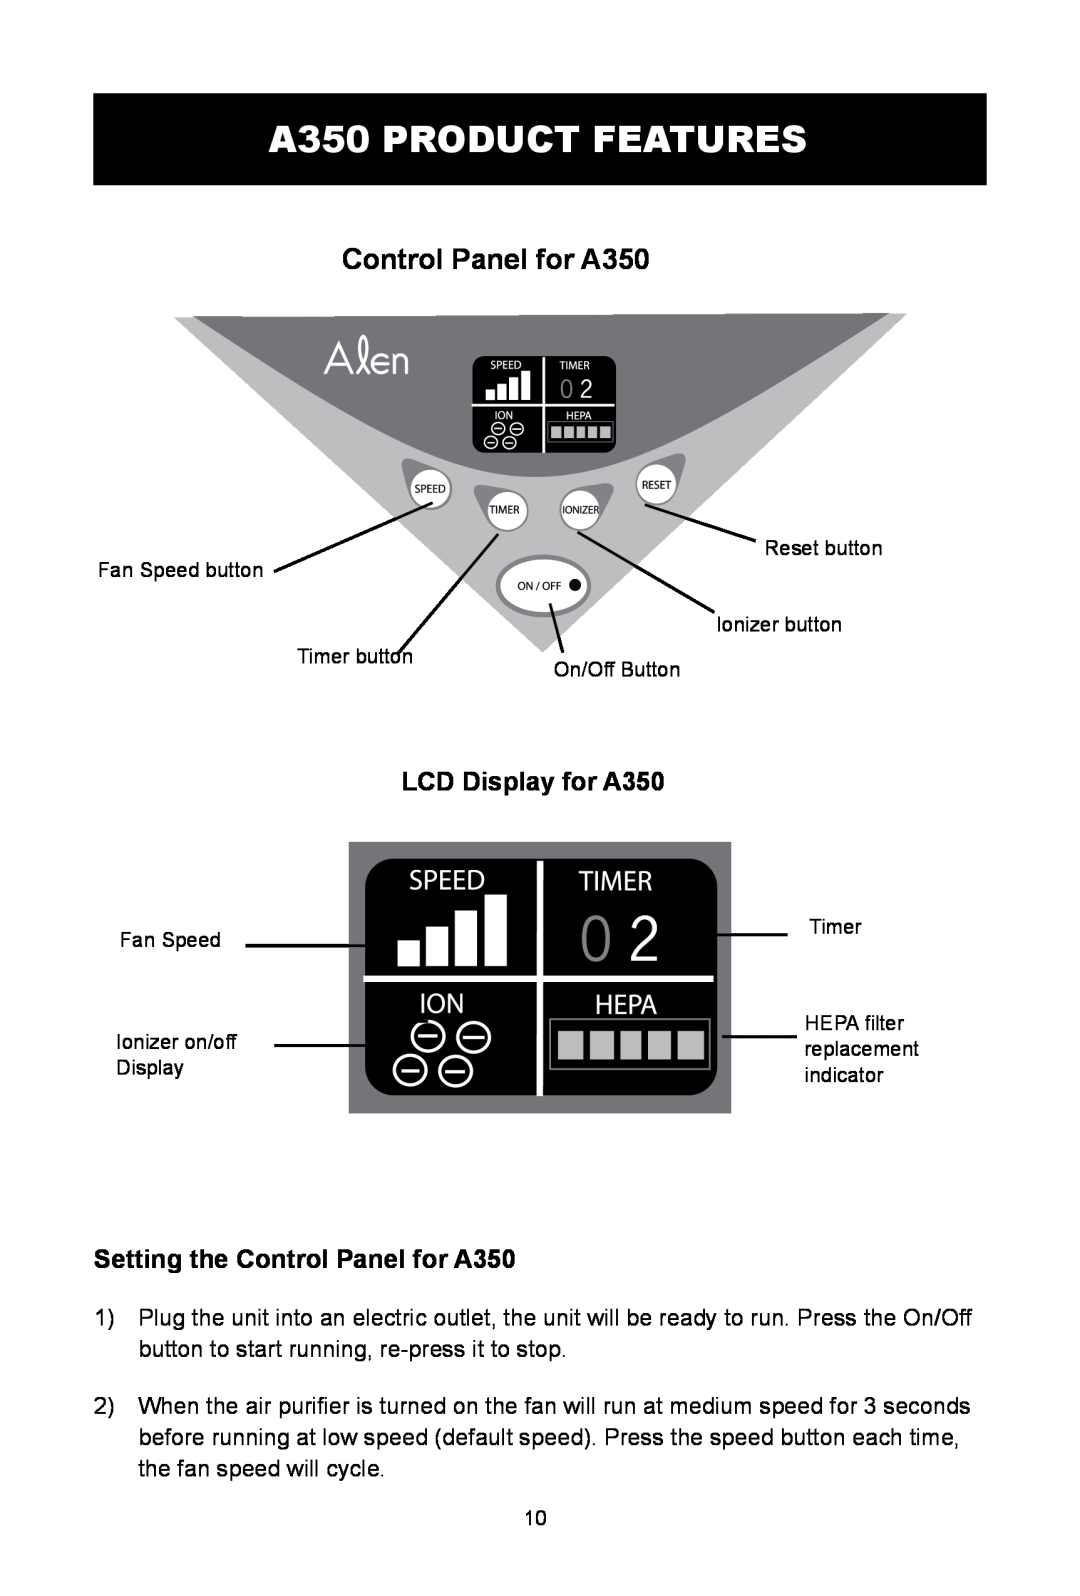 Alen T300, T100, A375 UV user manual A350 PRODUCT FEATURES, LCD Display for A350, Setting the Control Panel for A350 